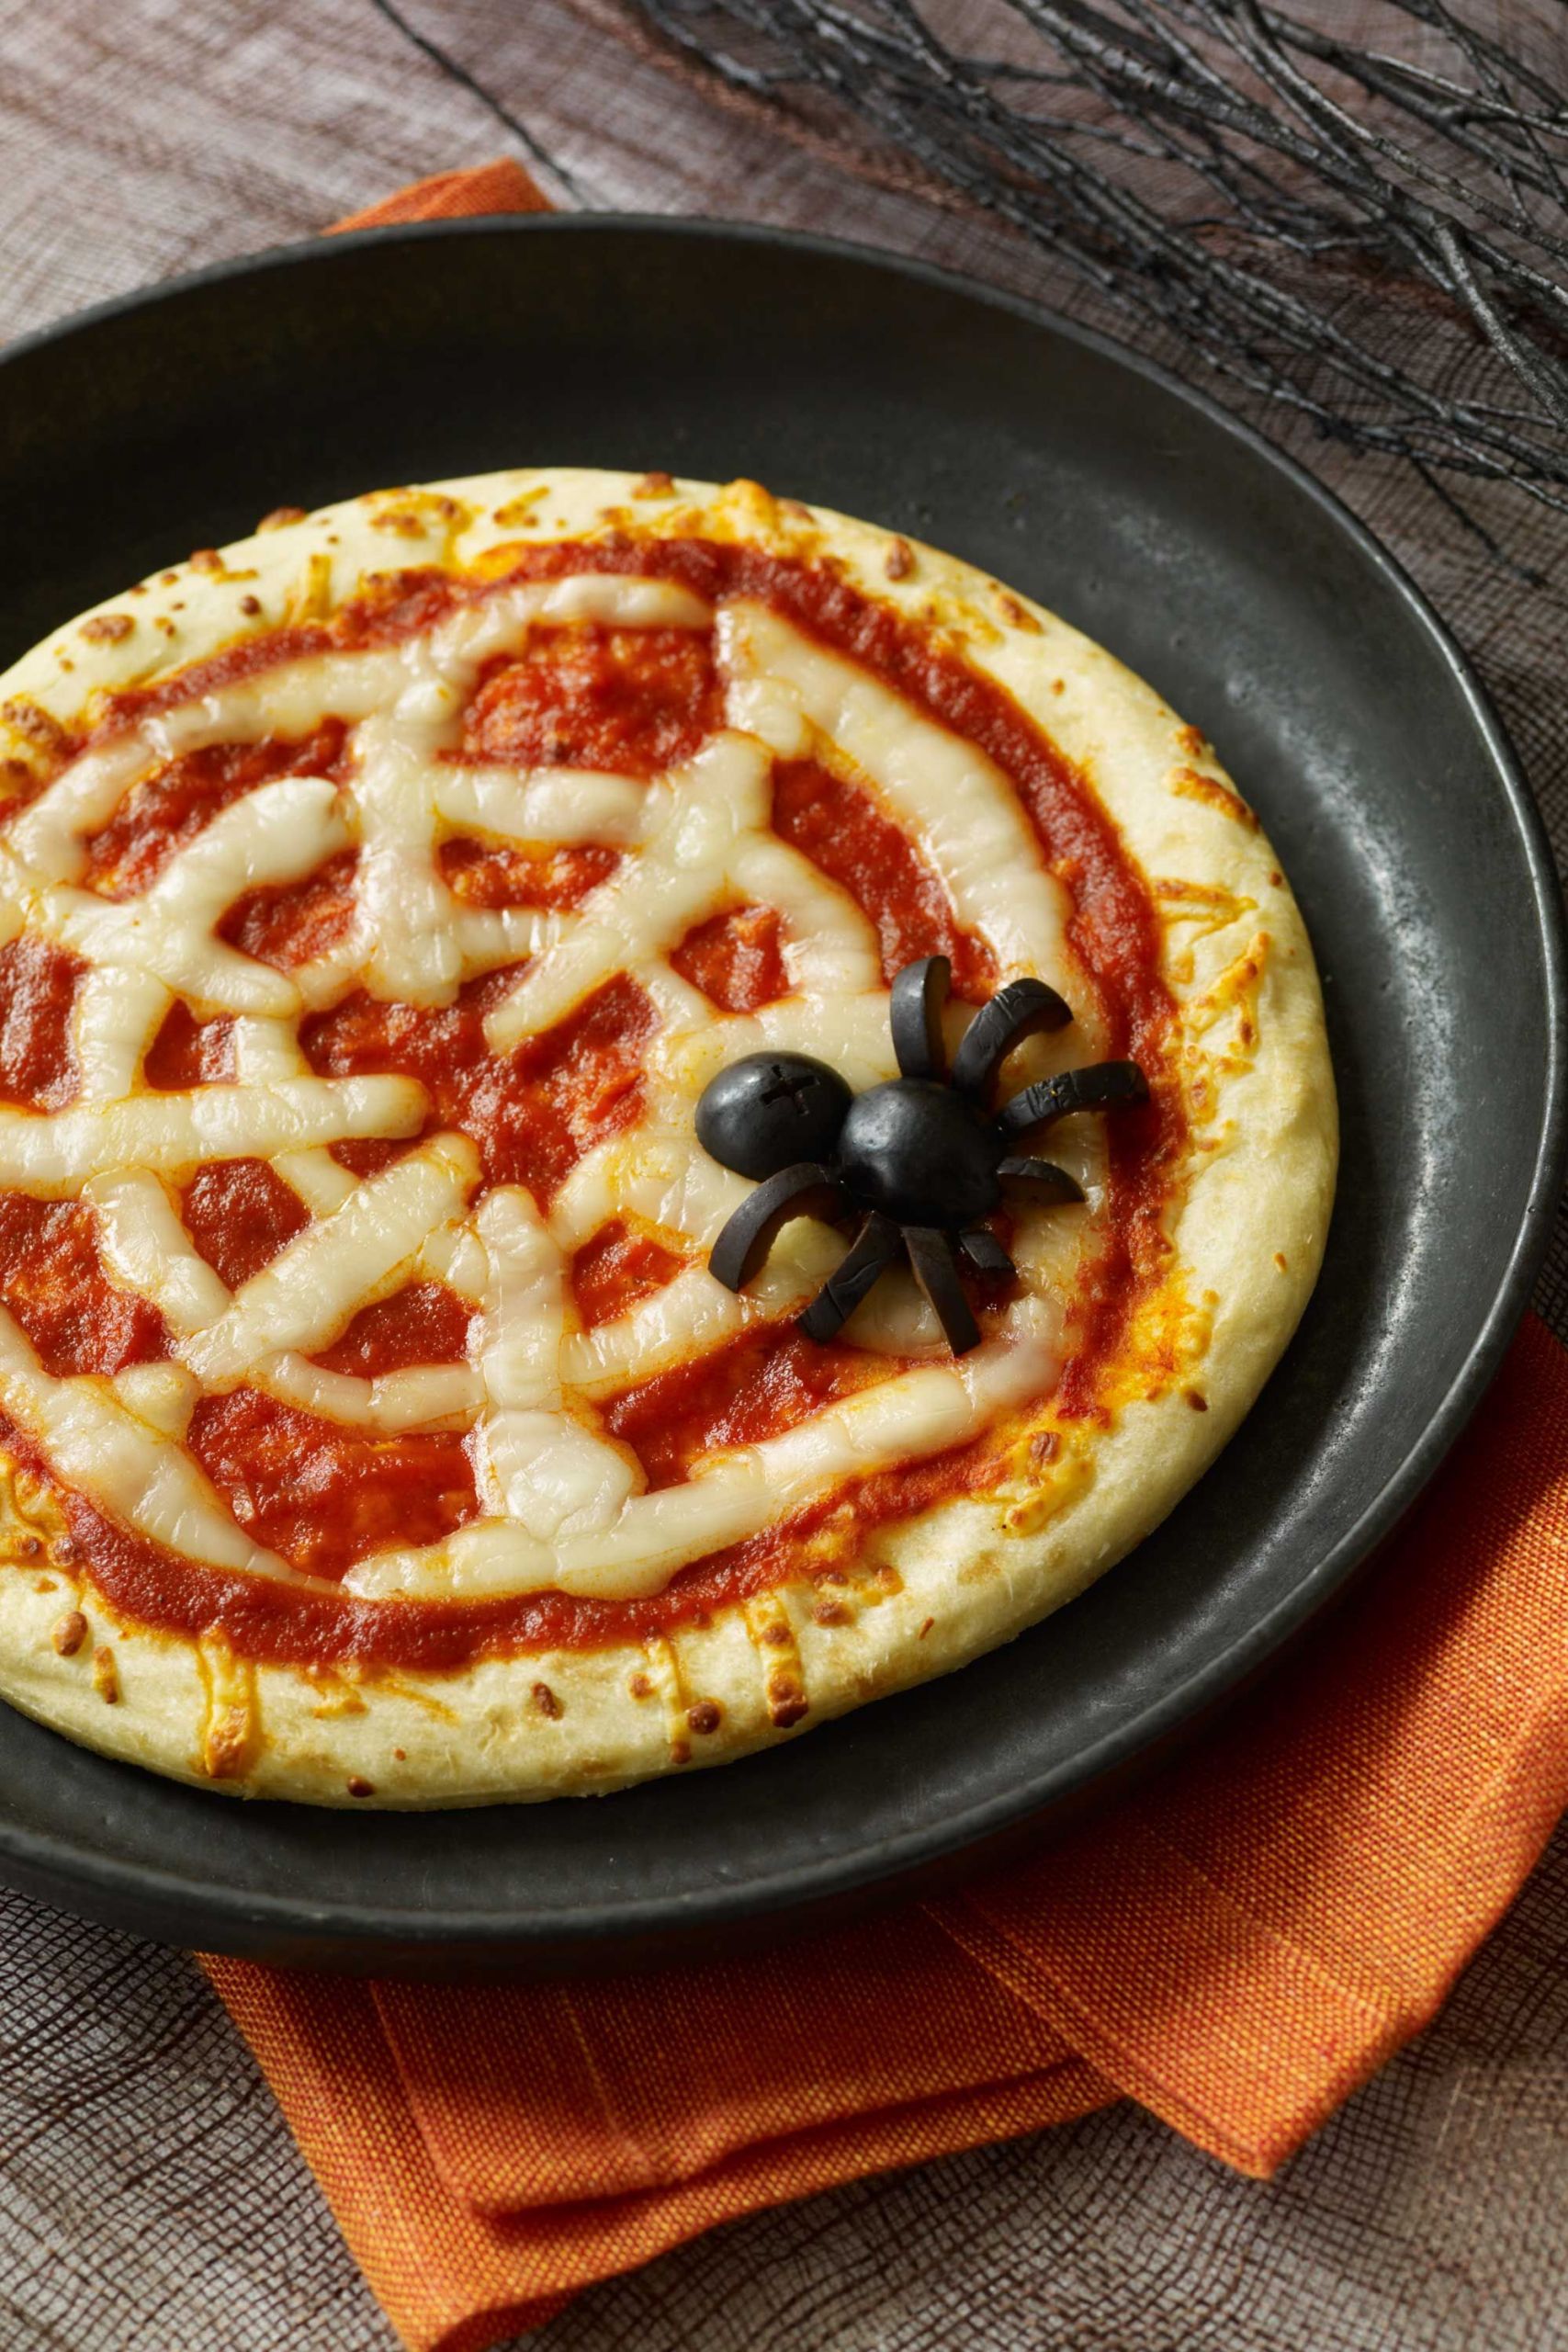 Halloween Pizza Party Ideas
 32 Halloween Finger Foods to Whip Up This Year